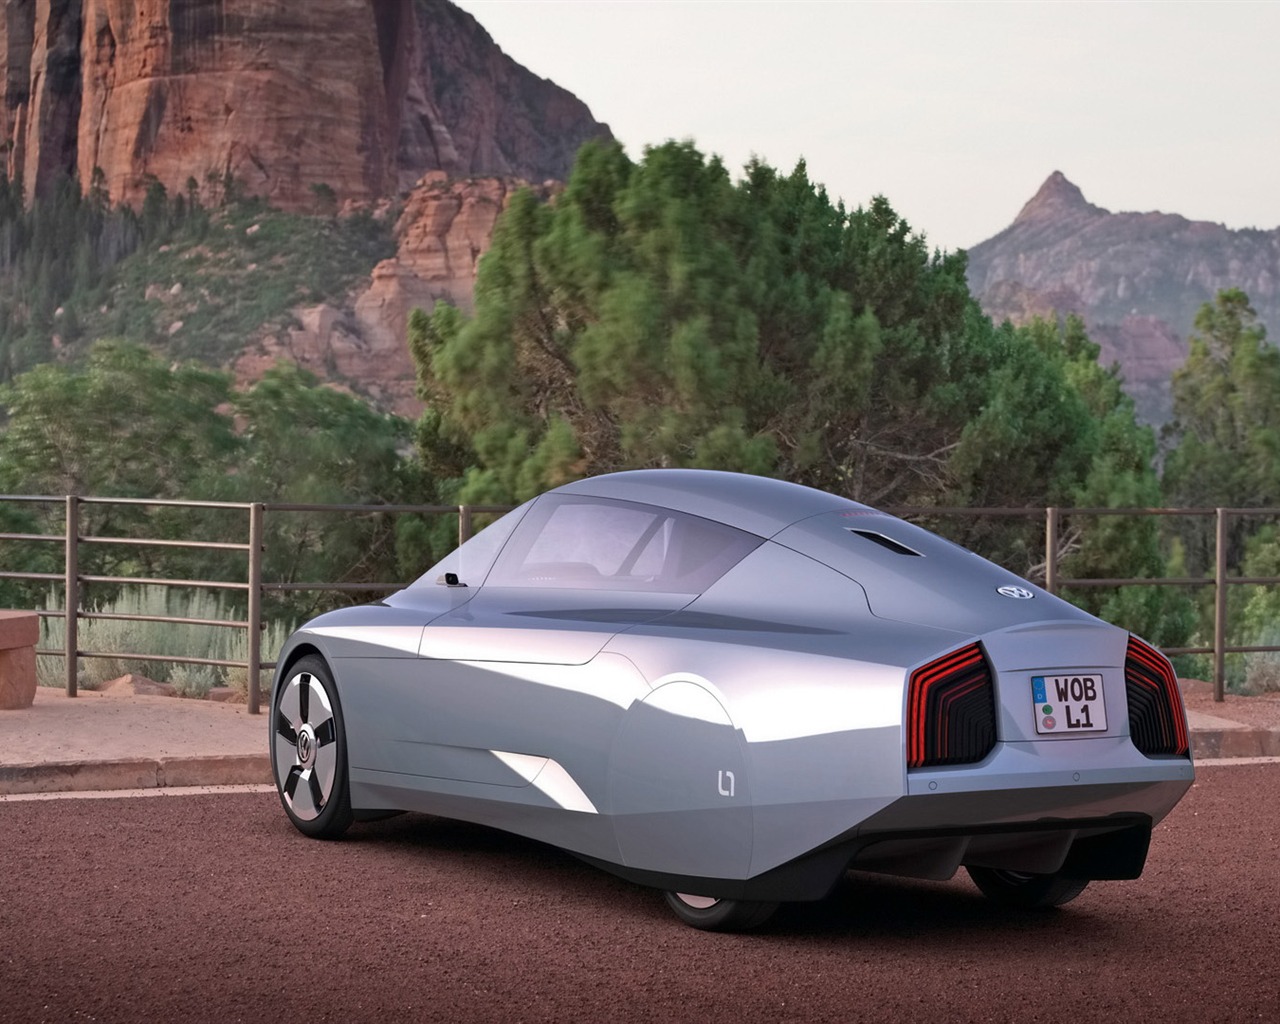 Volkswagen L1 Tapety Concept Car #12 - 1280x1024